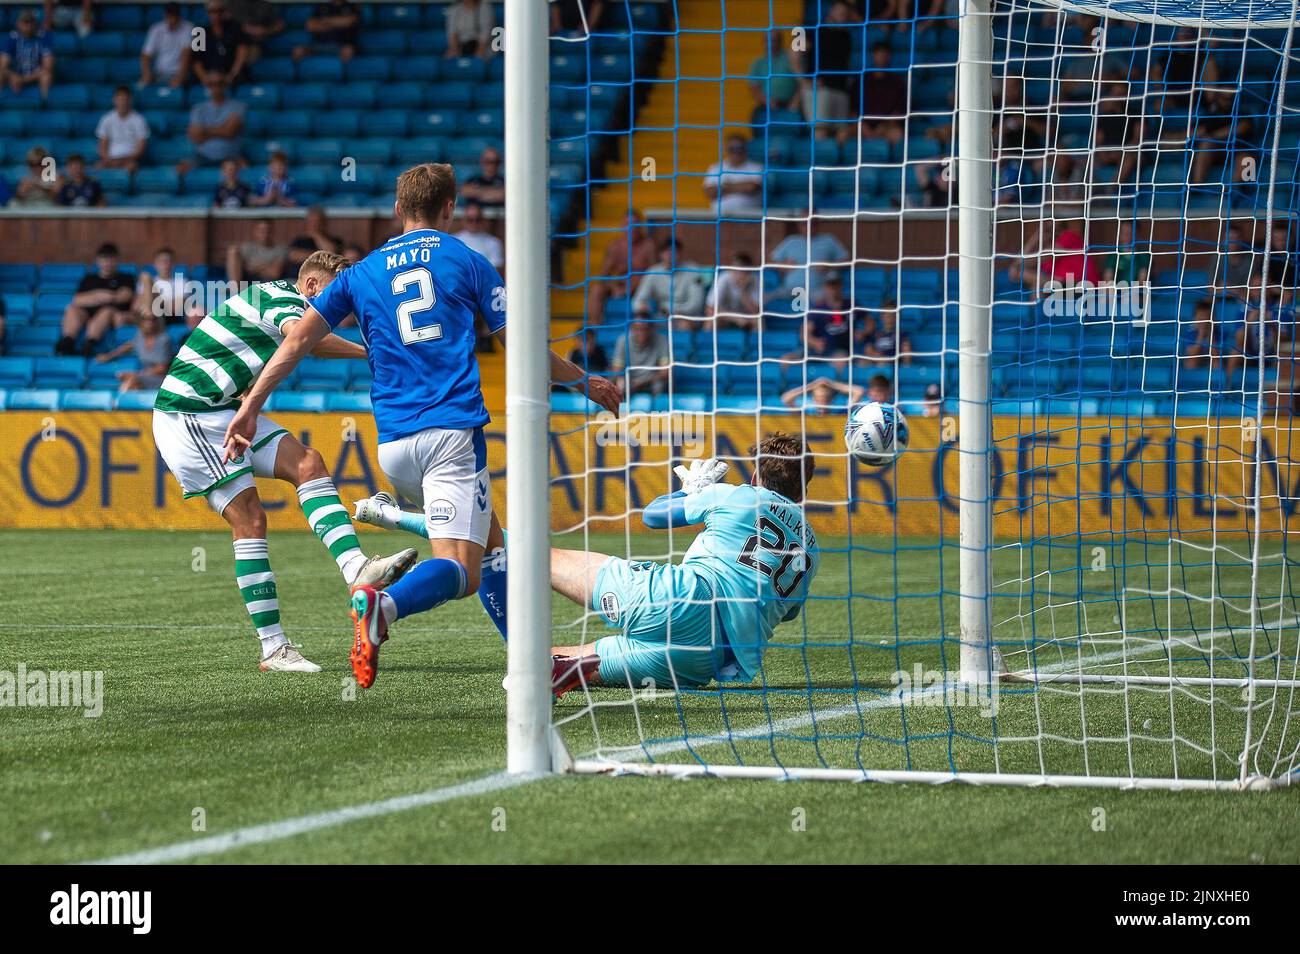 Kilmarnock, Scotland, UK. Kilmarnock, Scotland, UK. 14th August 2022; The BBSP Stadium Rugby Park, Kilmarnock, Scotland: Scottish premier league football, Kilmarnock FC versus Celtic: Carl Starfelt of Celtic scores to make it 4-0 to Celtic in the 76th minute Credit: Action Plus Sports Images/Alamy Live News Credit: Action Plus Sports Images/Alamy Live News Stock Photo